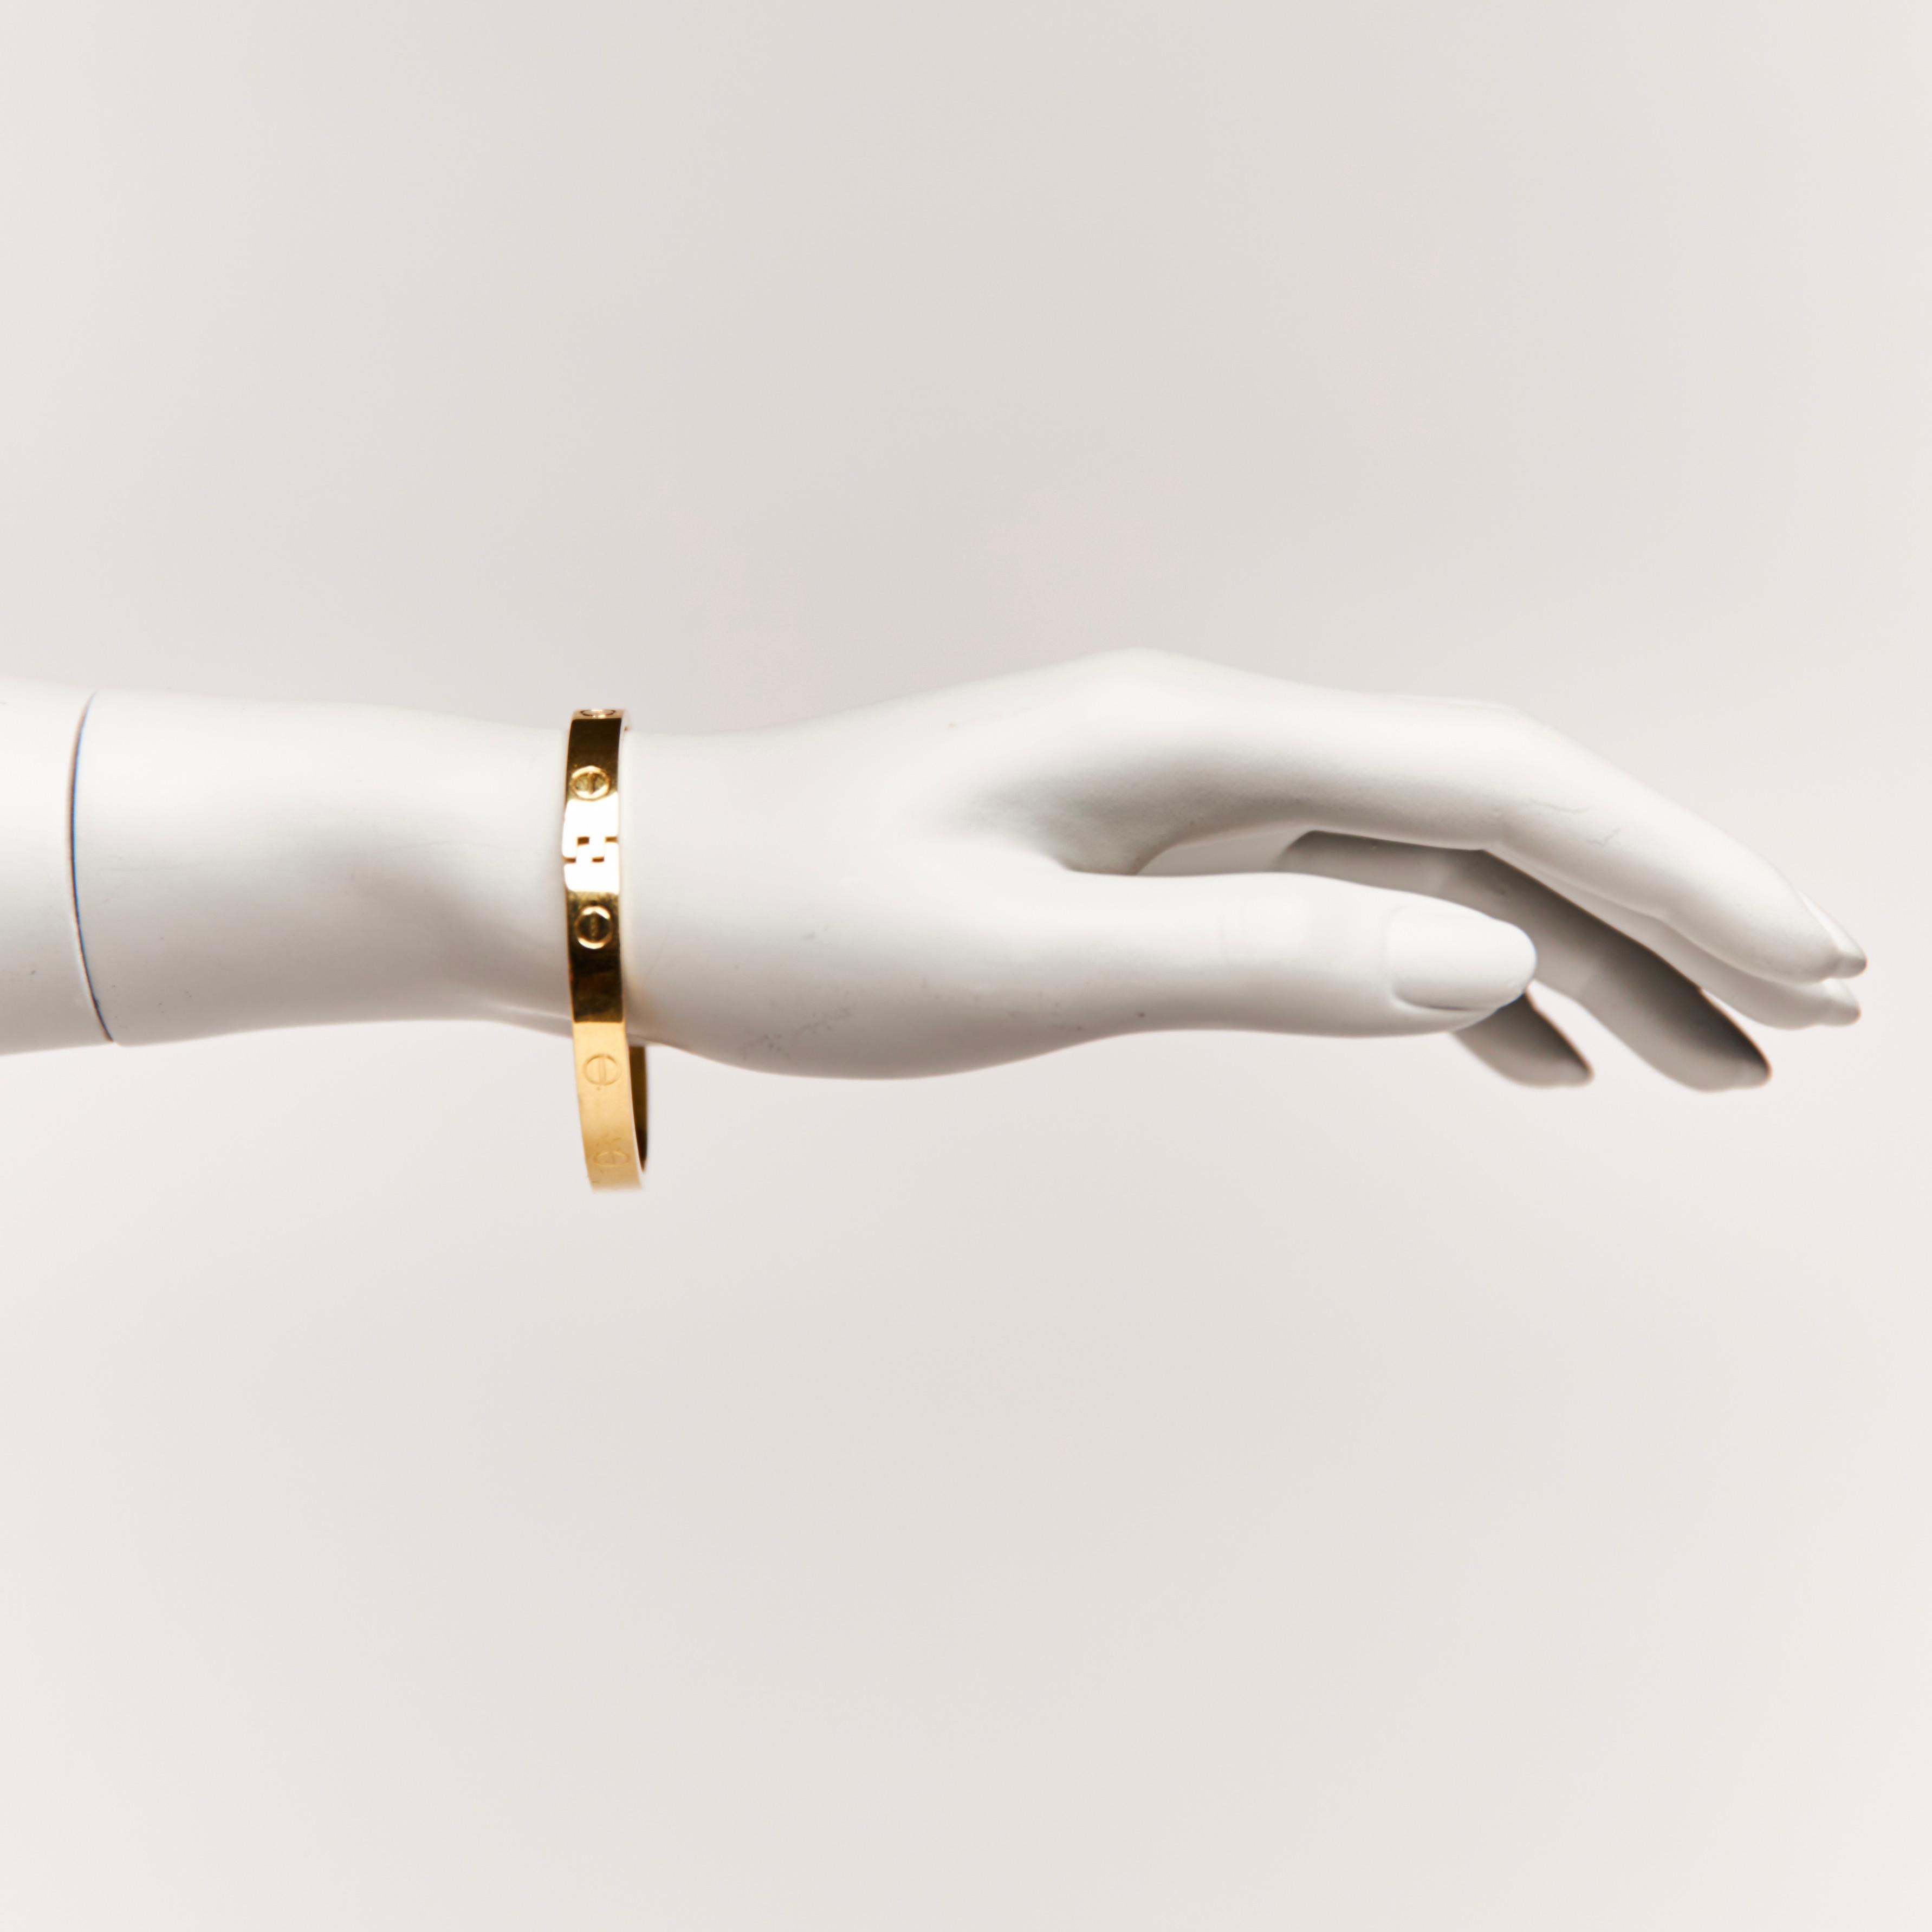 This is the “Love” bracelet by Designer Aldo Cipullo.  In 1970 Aldo Cipullo and Cartier made this with Charles Revson.

BRAND: Aldo Cipullo & Cartier X Charles Revson
ITEM CODE: 01970
MATERIAL: Gold electroplated
MEASURES: 2.75” x 2”
CIRCUMFERENCE: